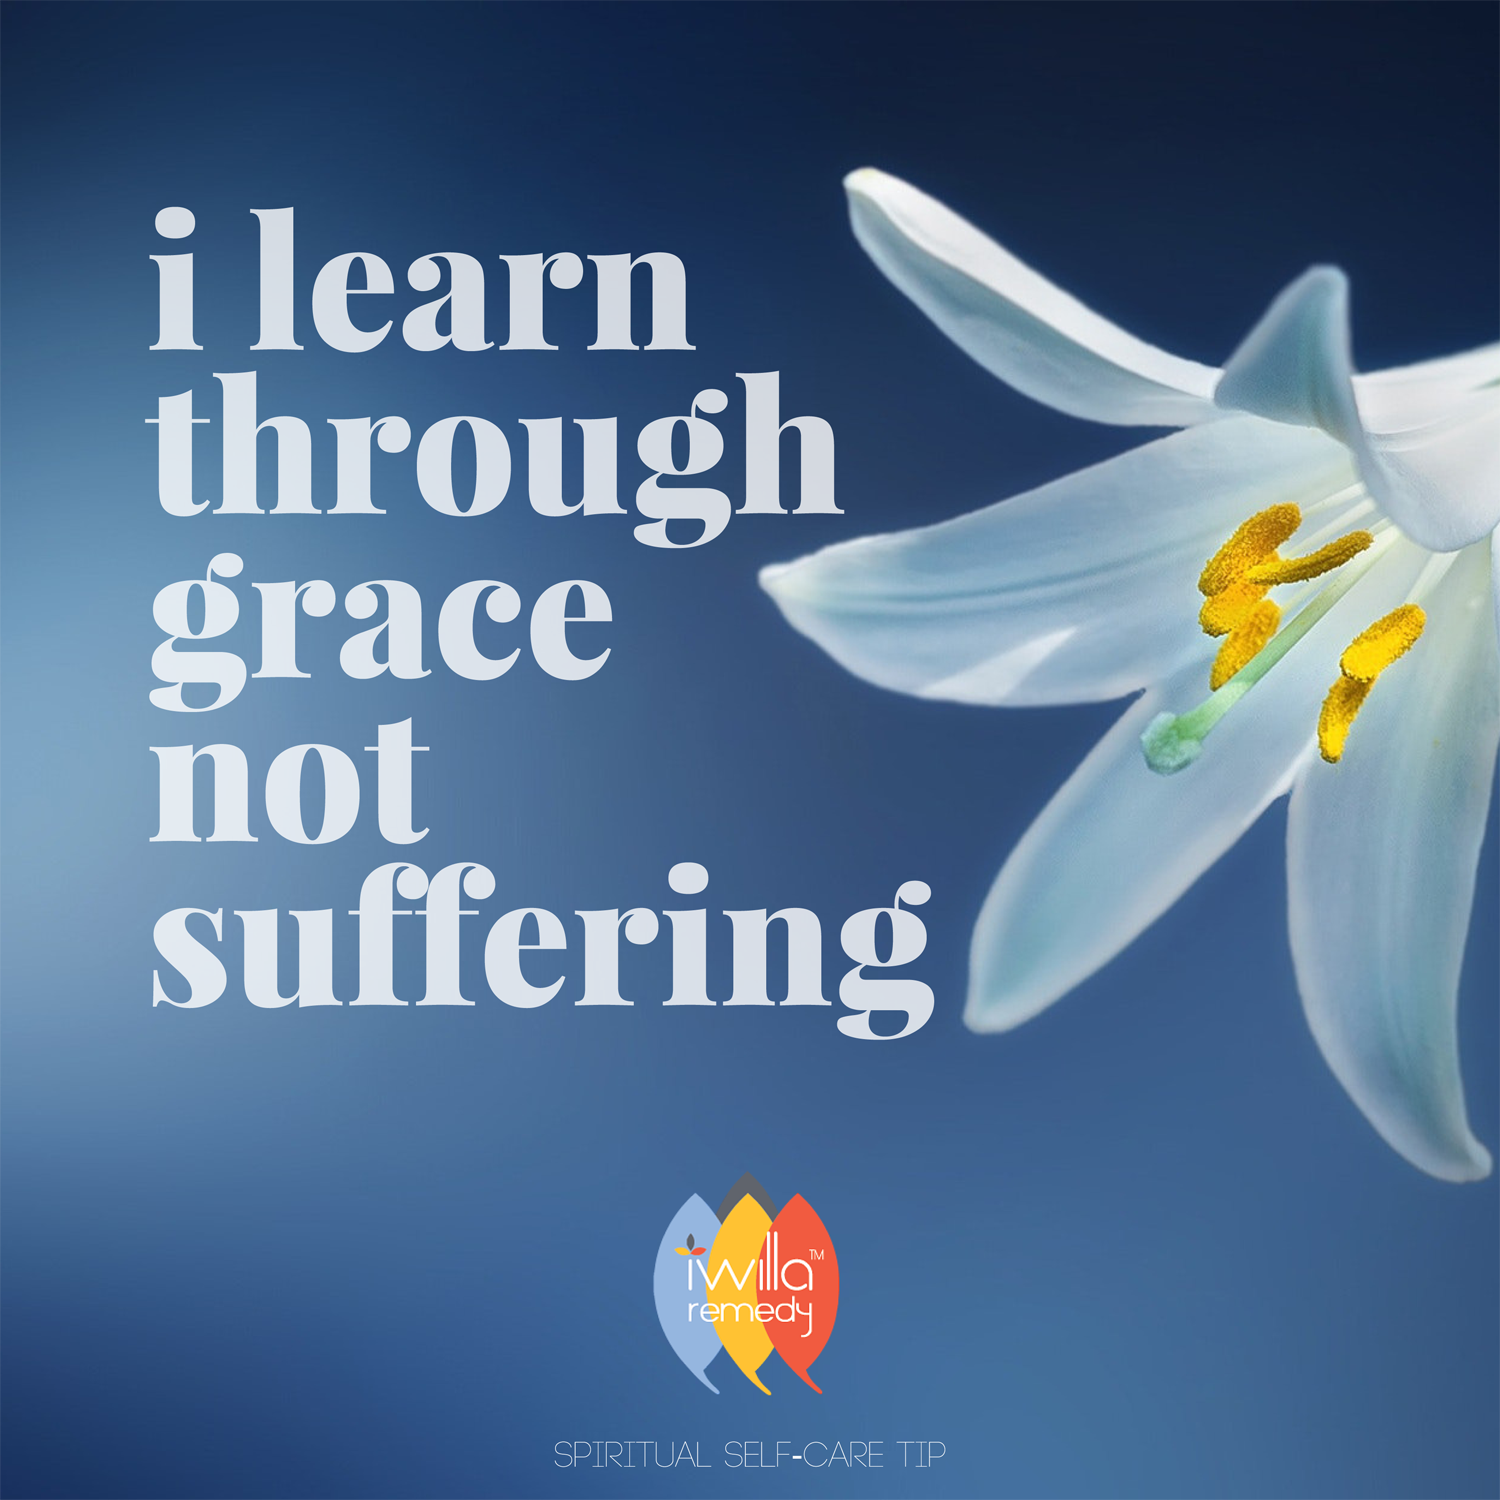 I Learn Through Grace Not Suffering